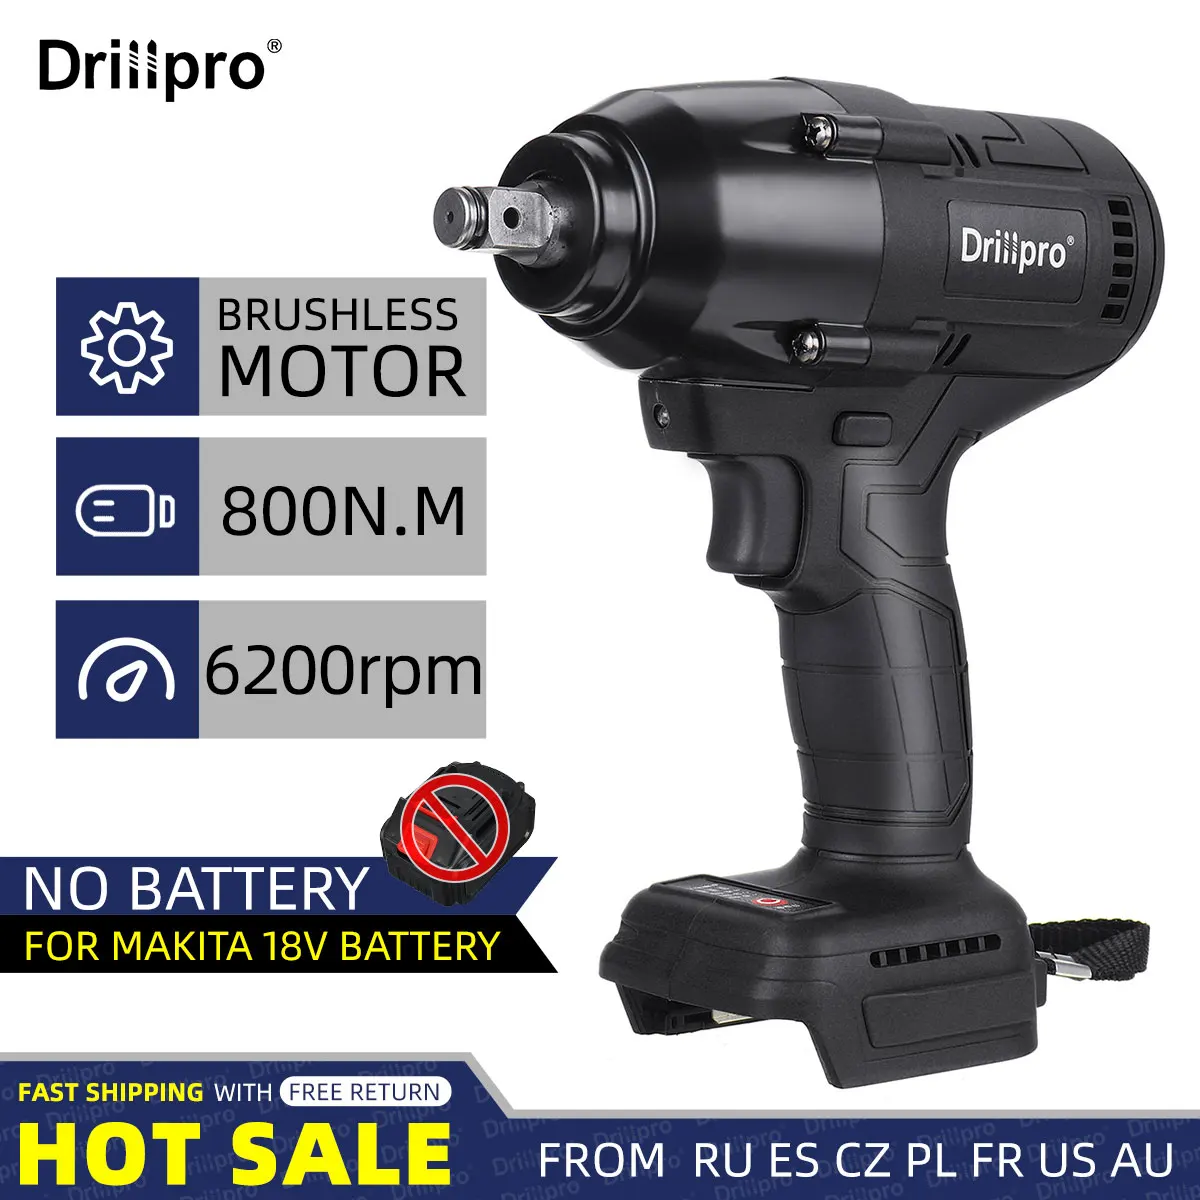 

Drillpro 800N.M High Torque Brushless Electric Impact Wrench Cordless 1/2" Wrench Truck Nuts Power Tool for Makita 18V Battery